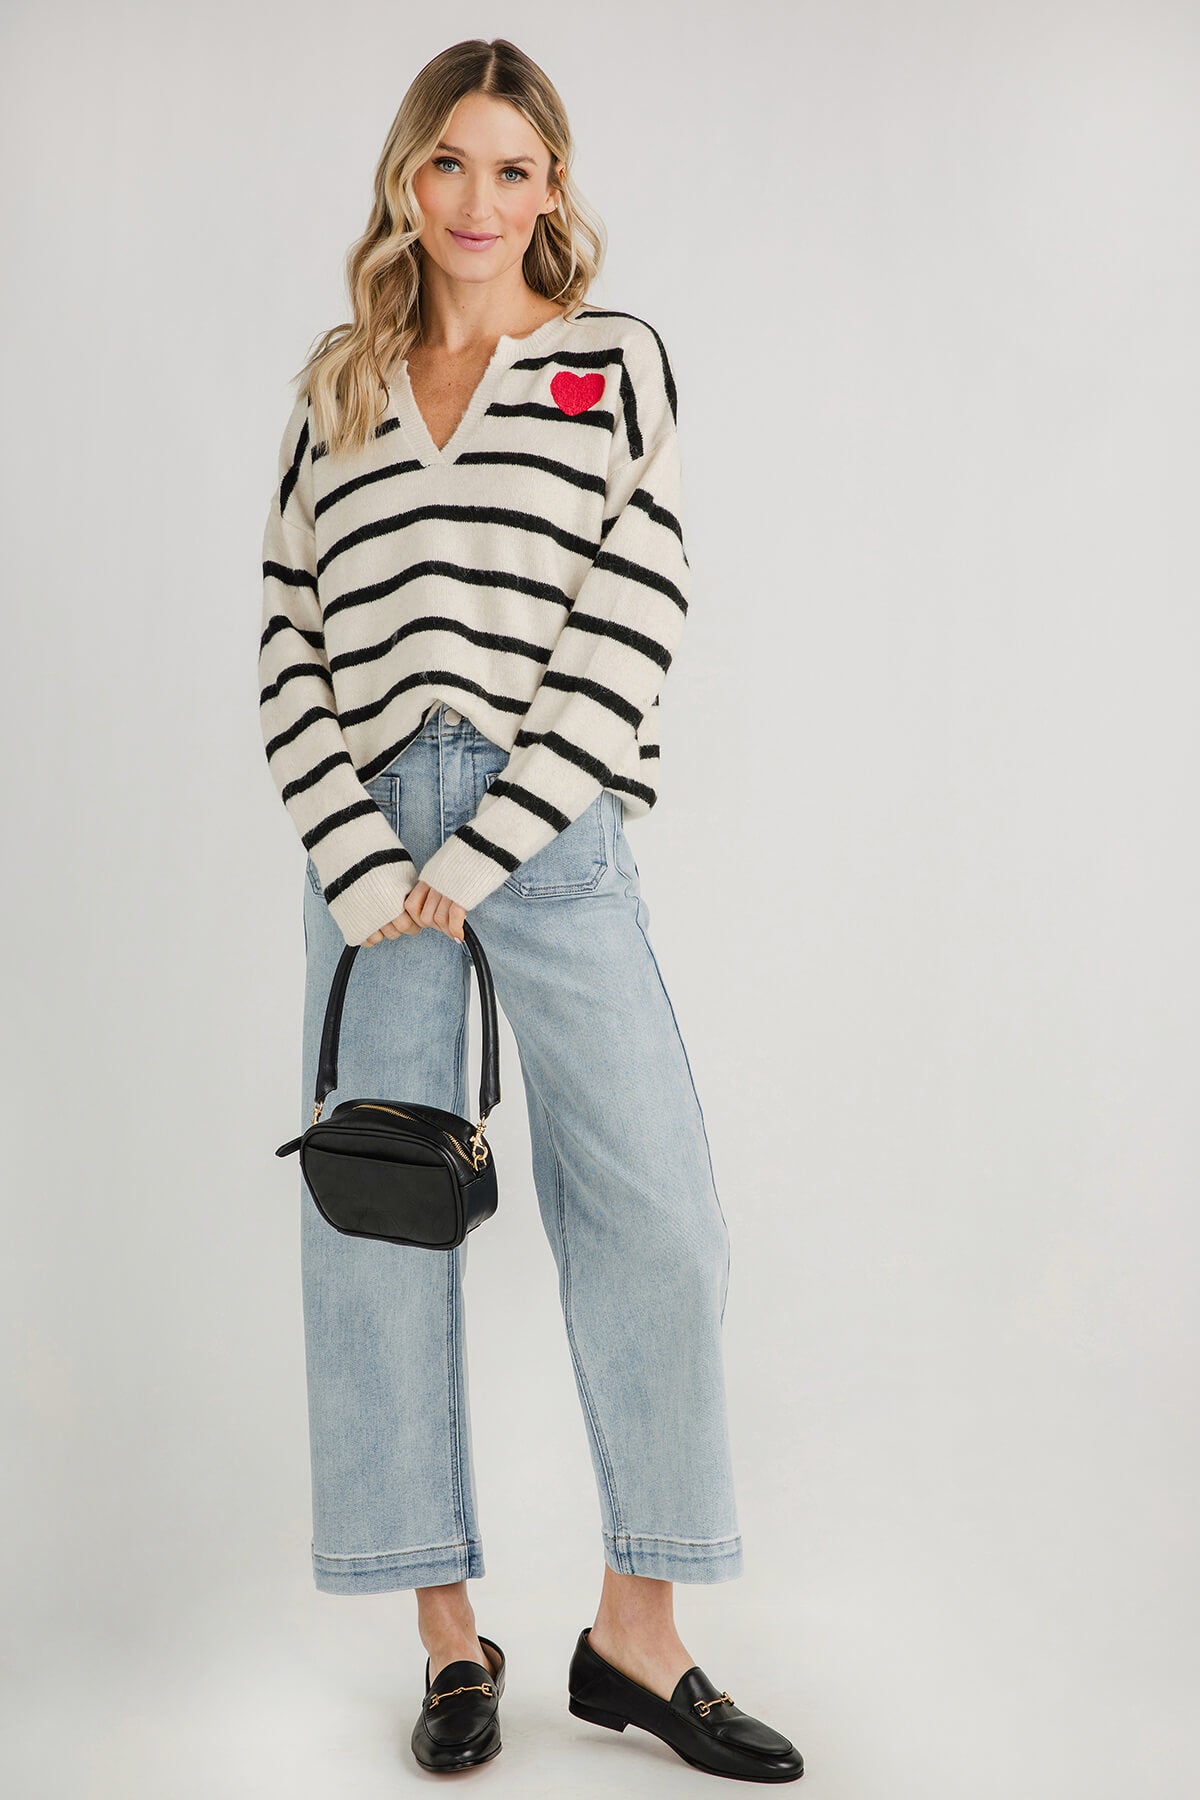 Sweet Lovely Striped Sweater with Heart Patch